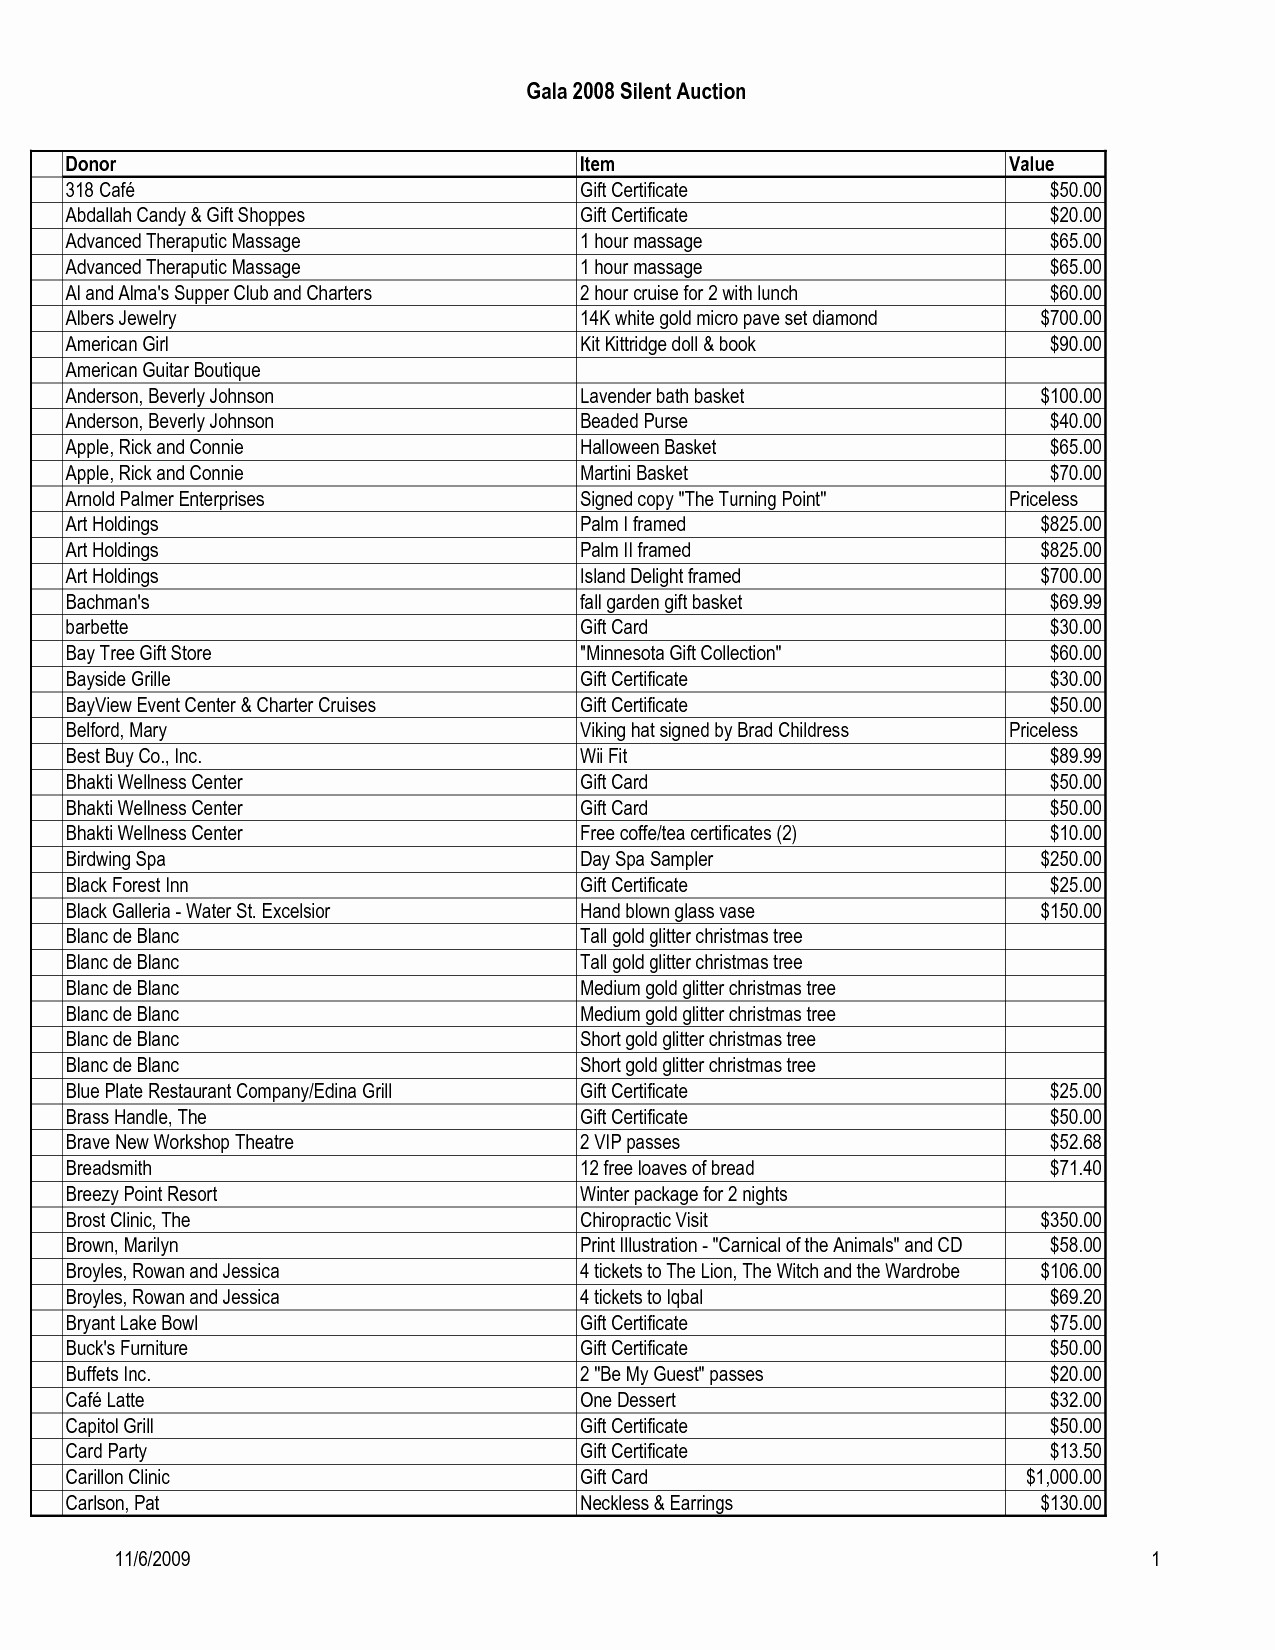 Itemized Donation List Printable Best Of Document